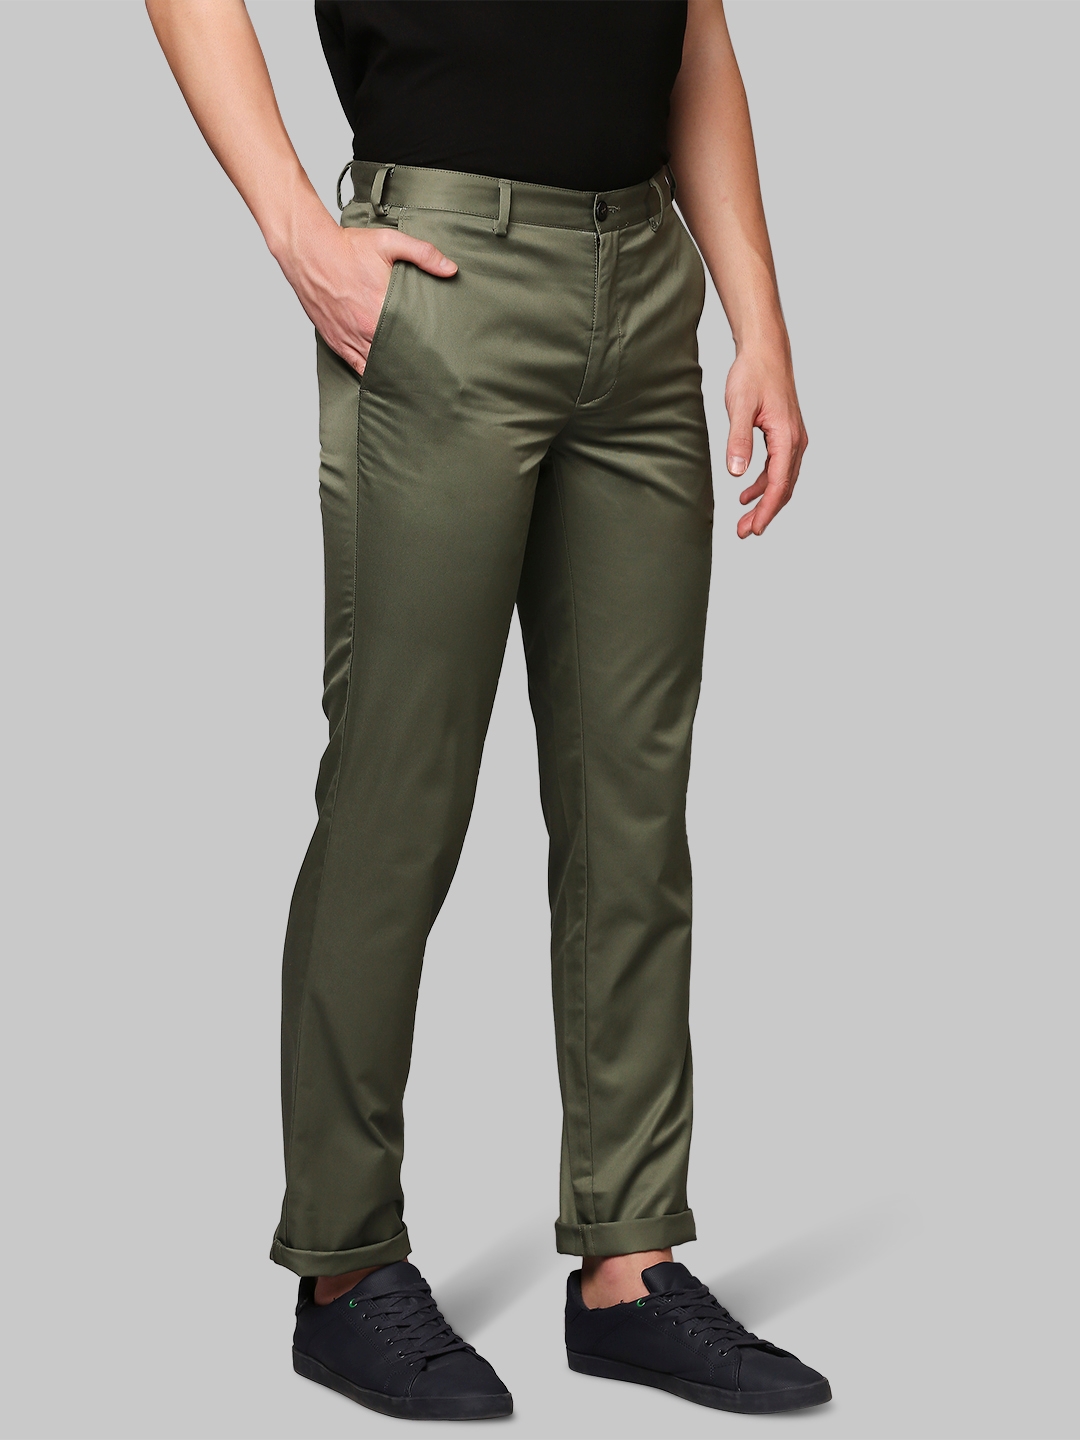 Buy C3 Moss Green Coloured Classic Formal Trousers for Men. - FT_3107_ at  Amazon.in